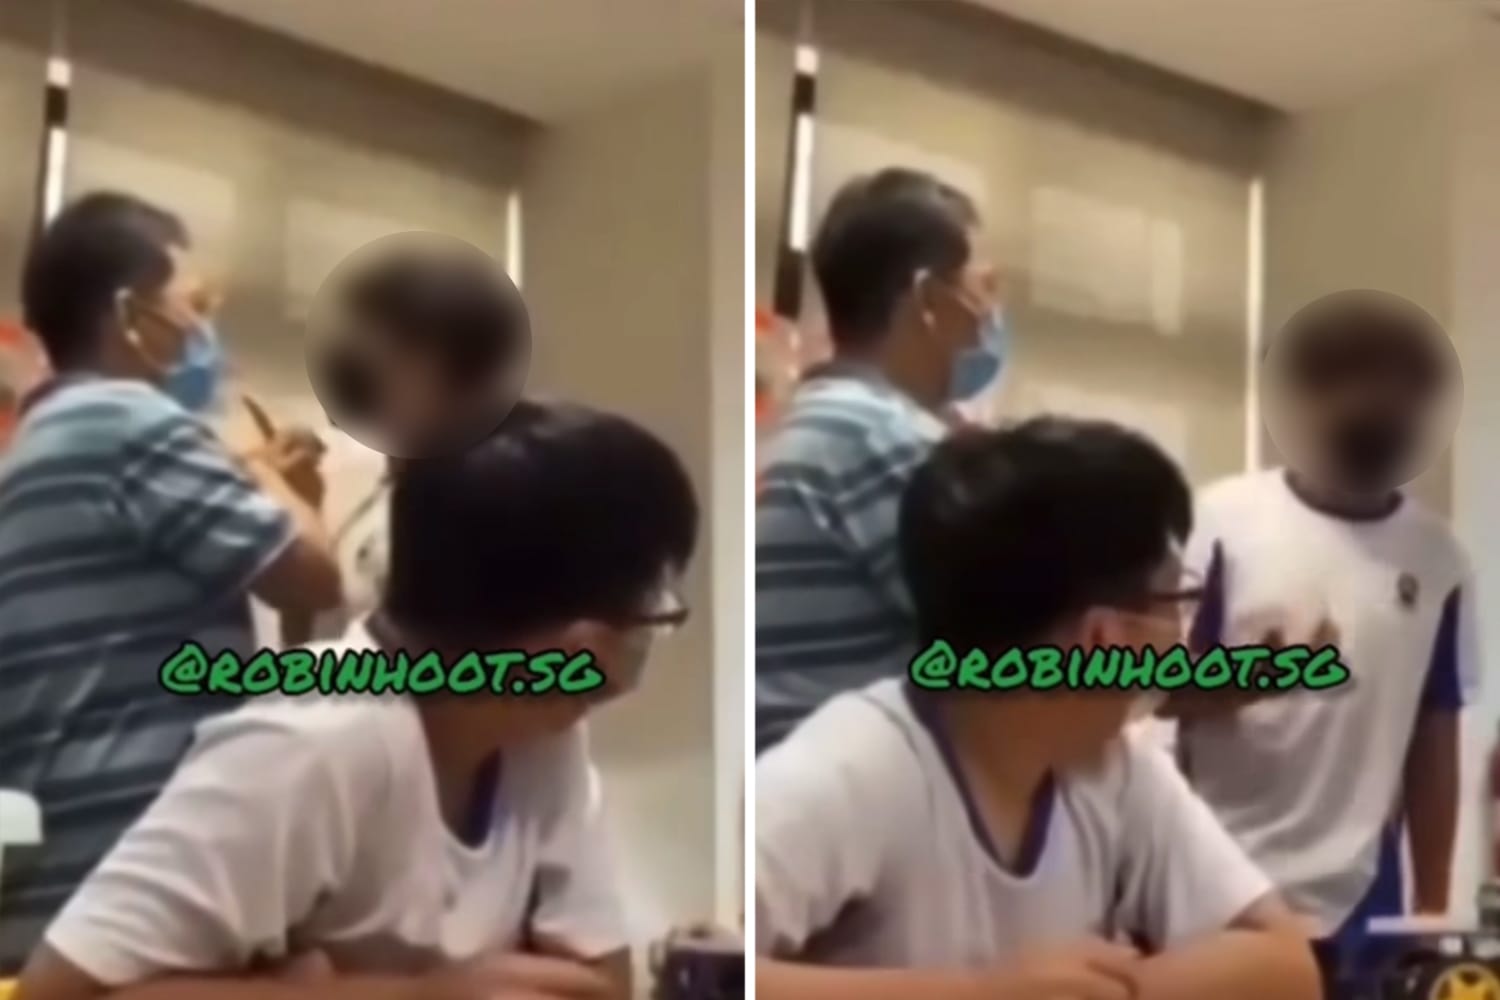 Scenes from a viral video showing a student in St Andrew's Secondary School confronting a teacher in what appears to be a classroom setting.